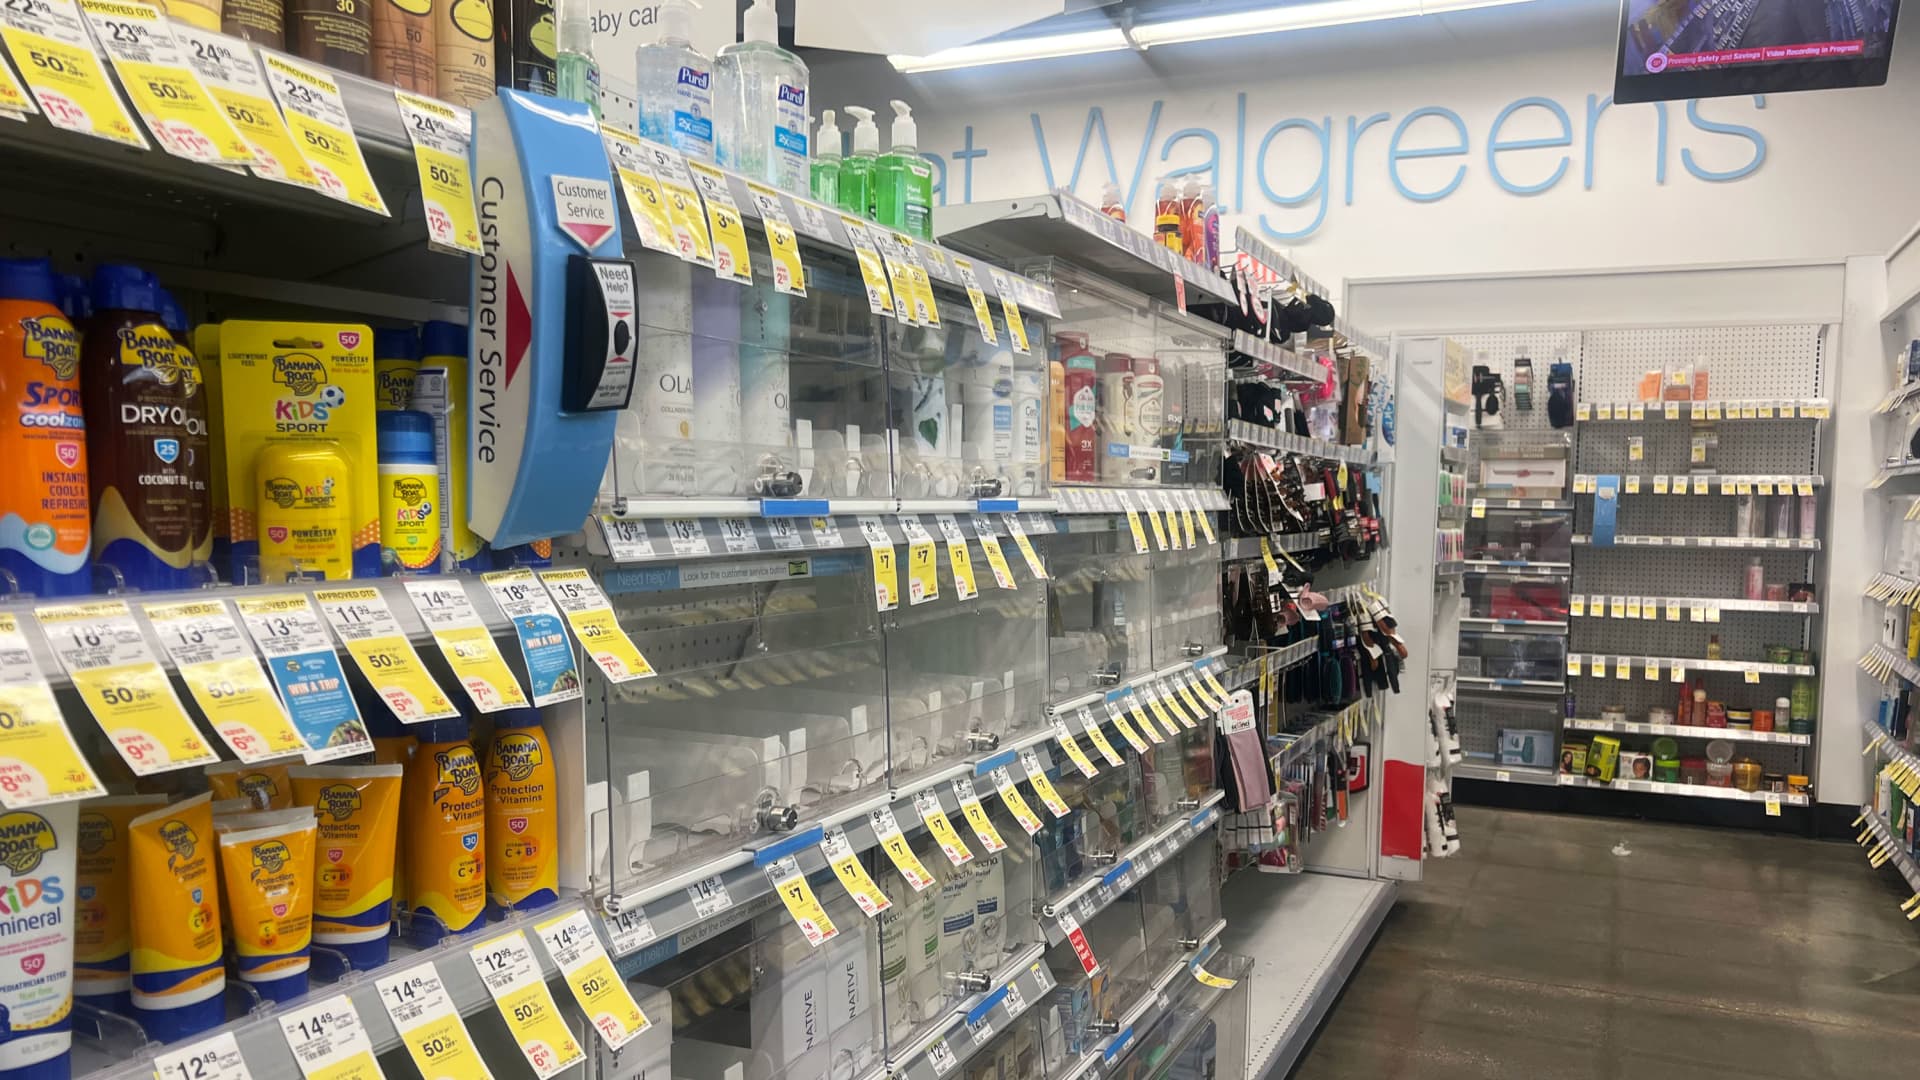 A Walgreens aisle with locked and unlocked areas